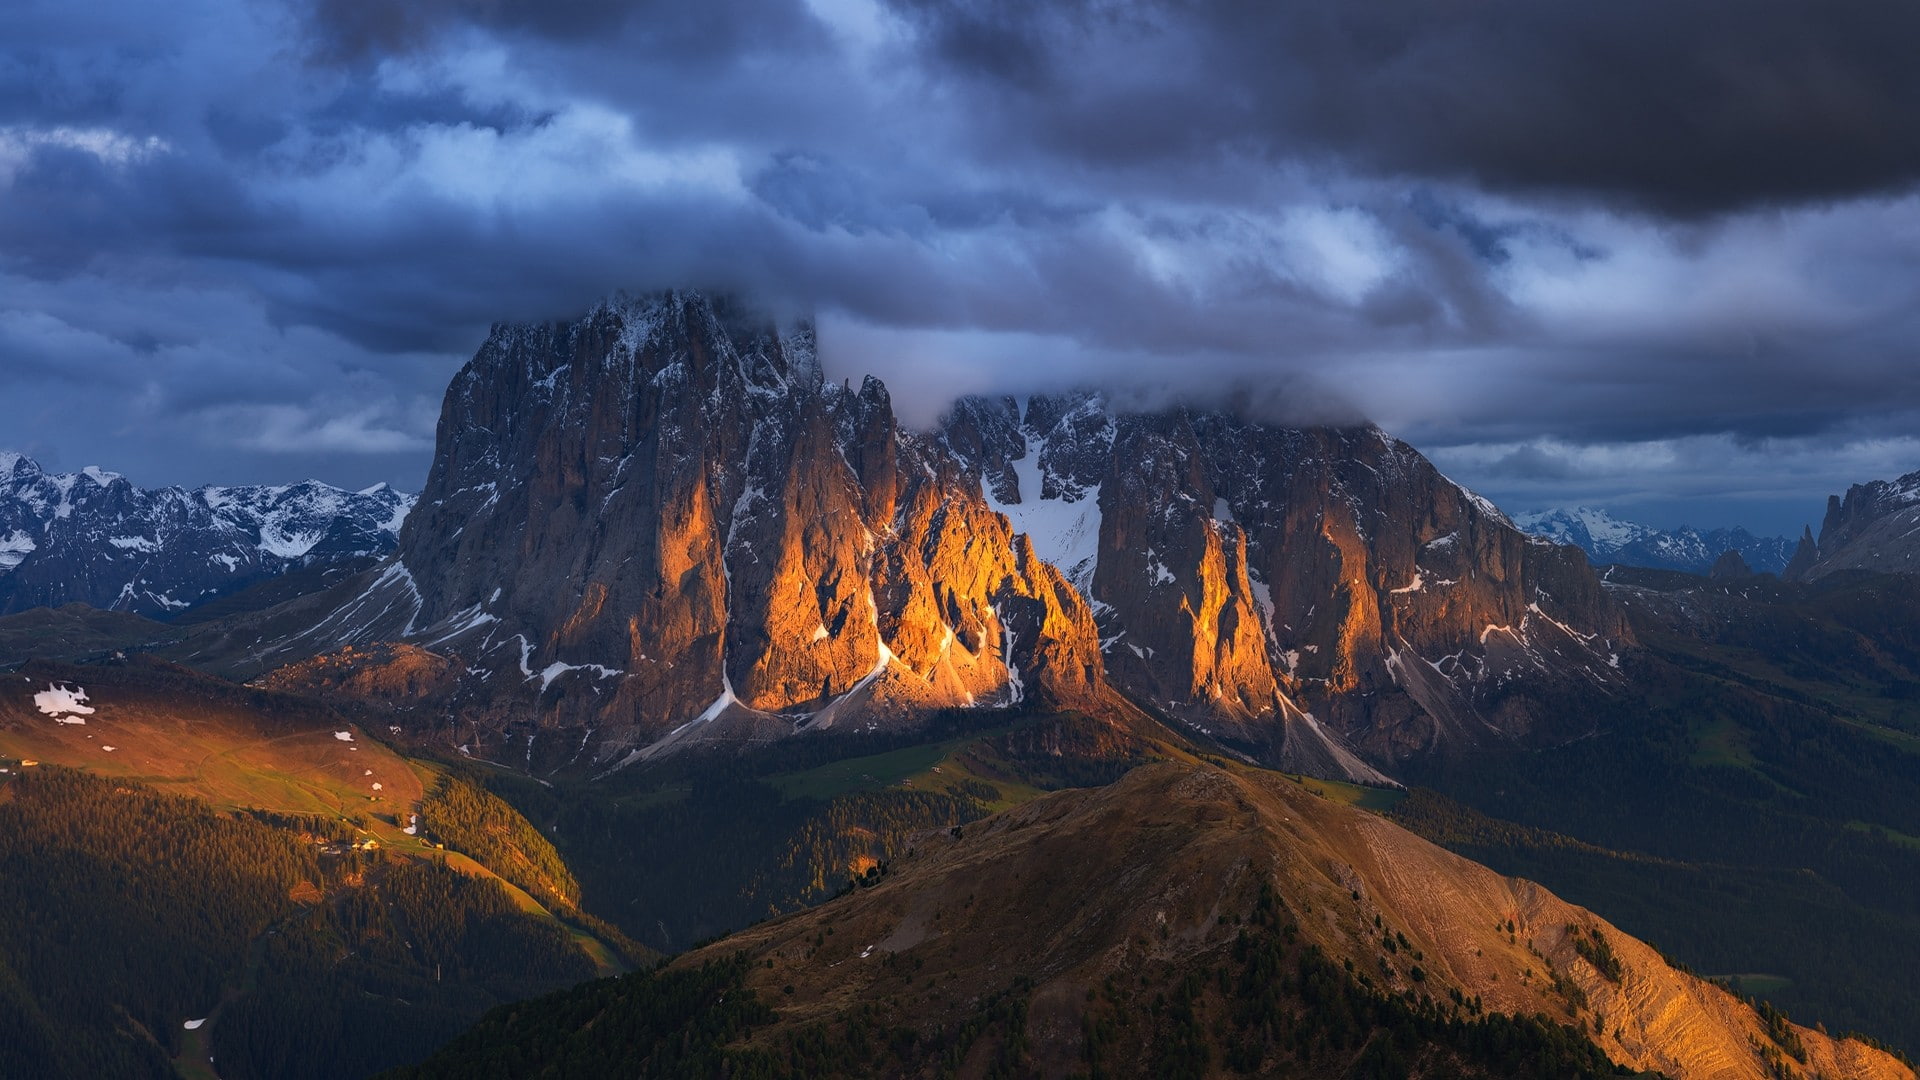 Landscape, Nature, Mountain, Snowy Peak, Clouds, Sunset, Forest, Italy, Alps